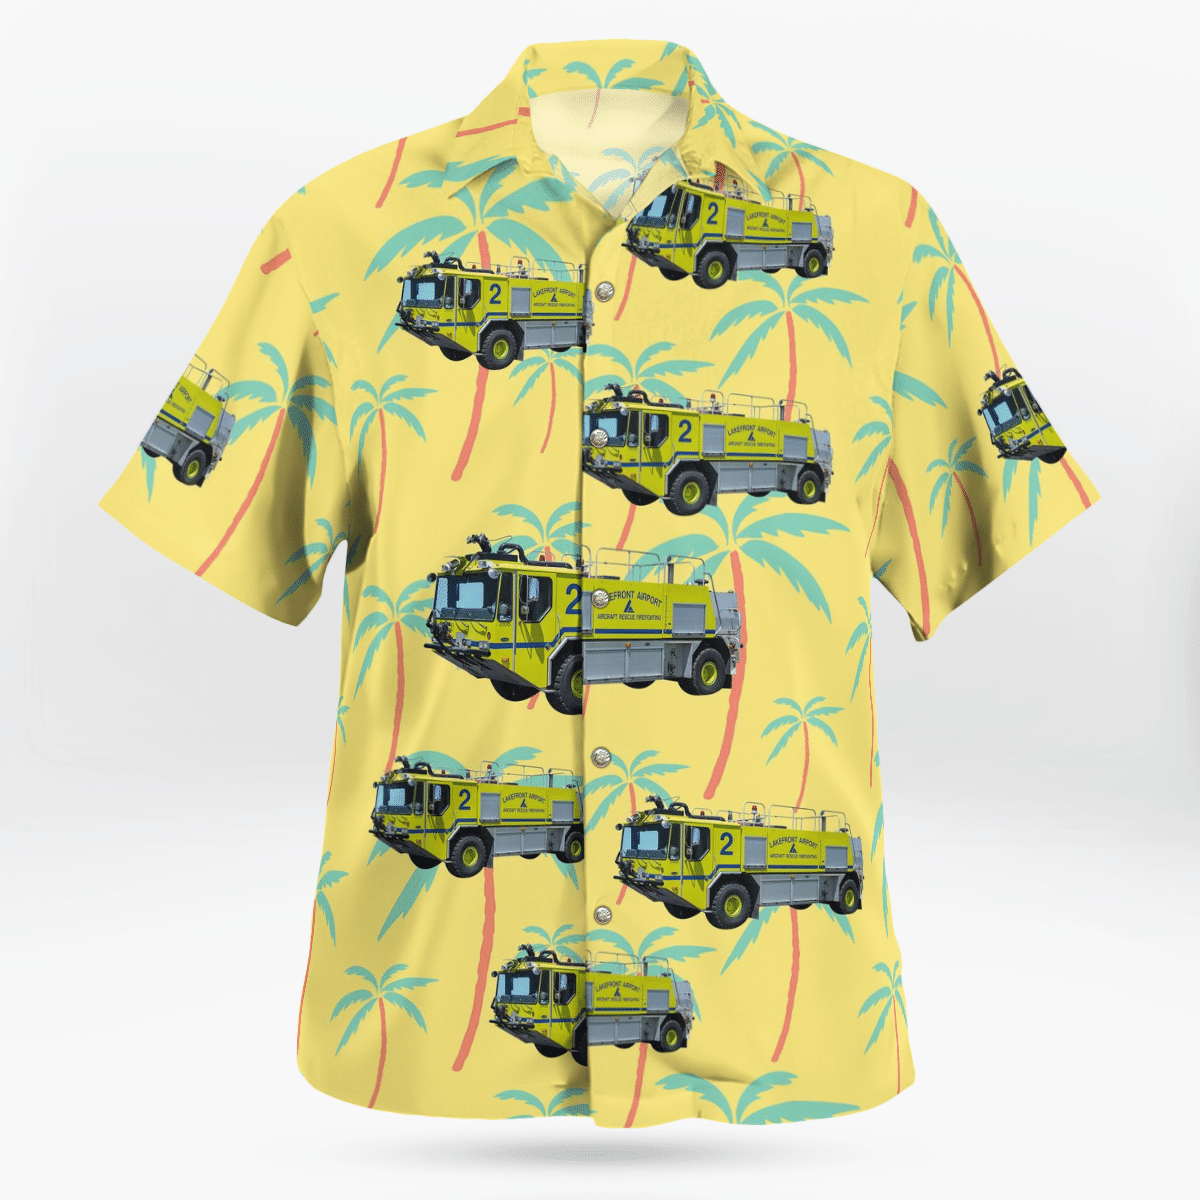 Hawaiian shirts never go out of style 172